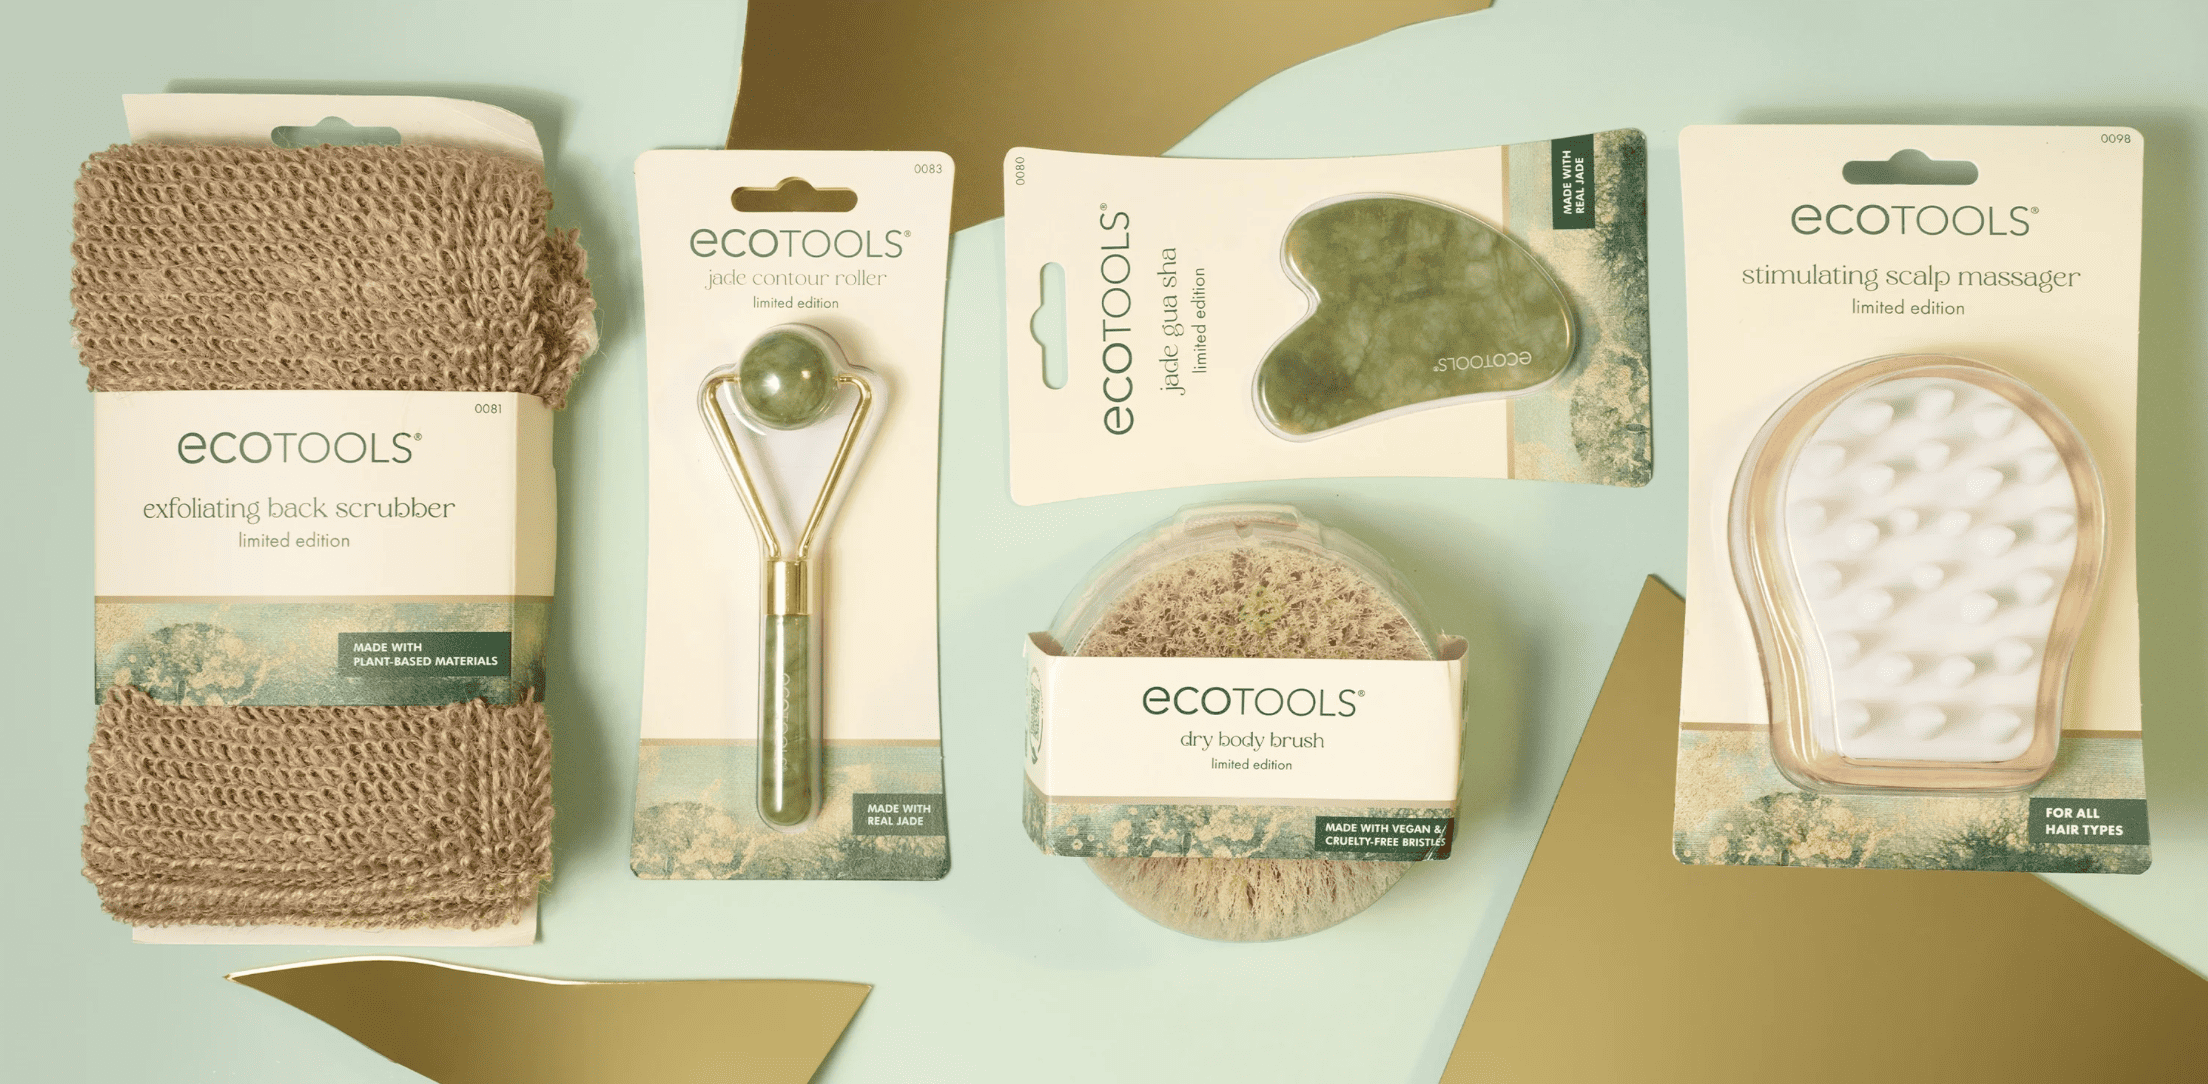 image of ecotools branded beauty tools